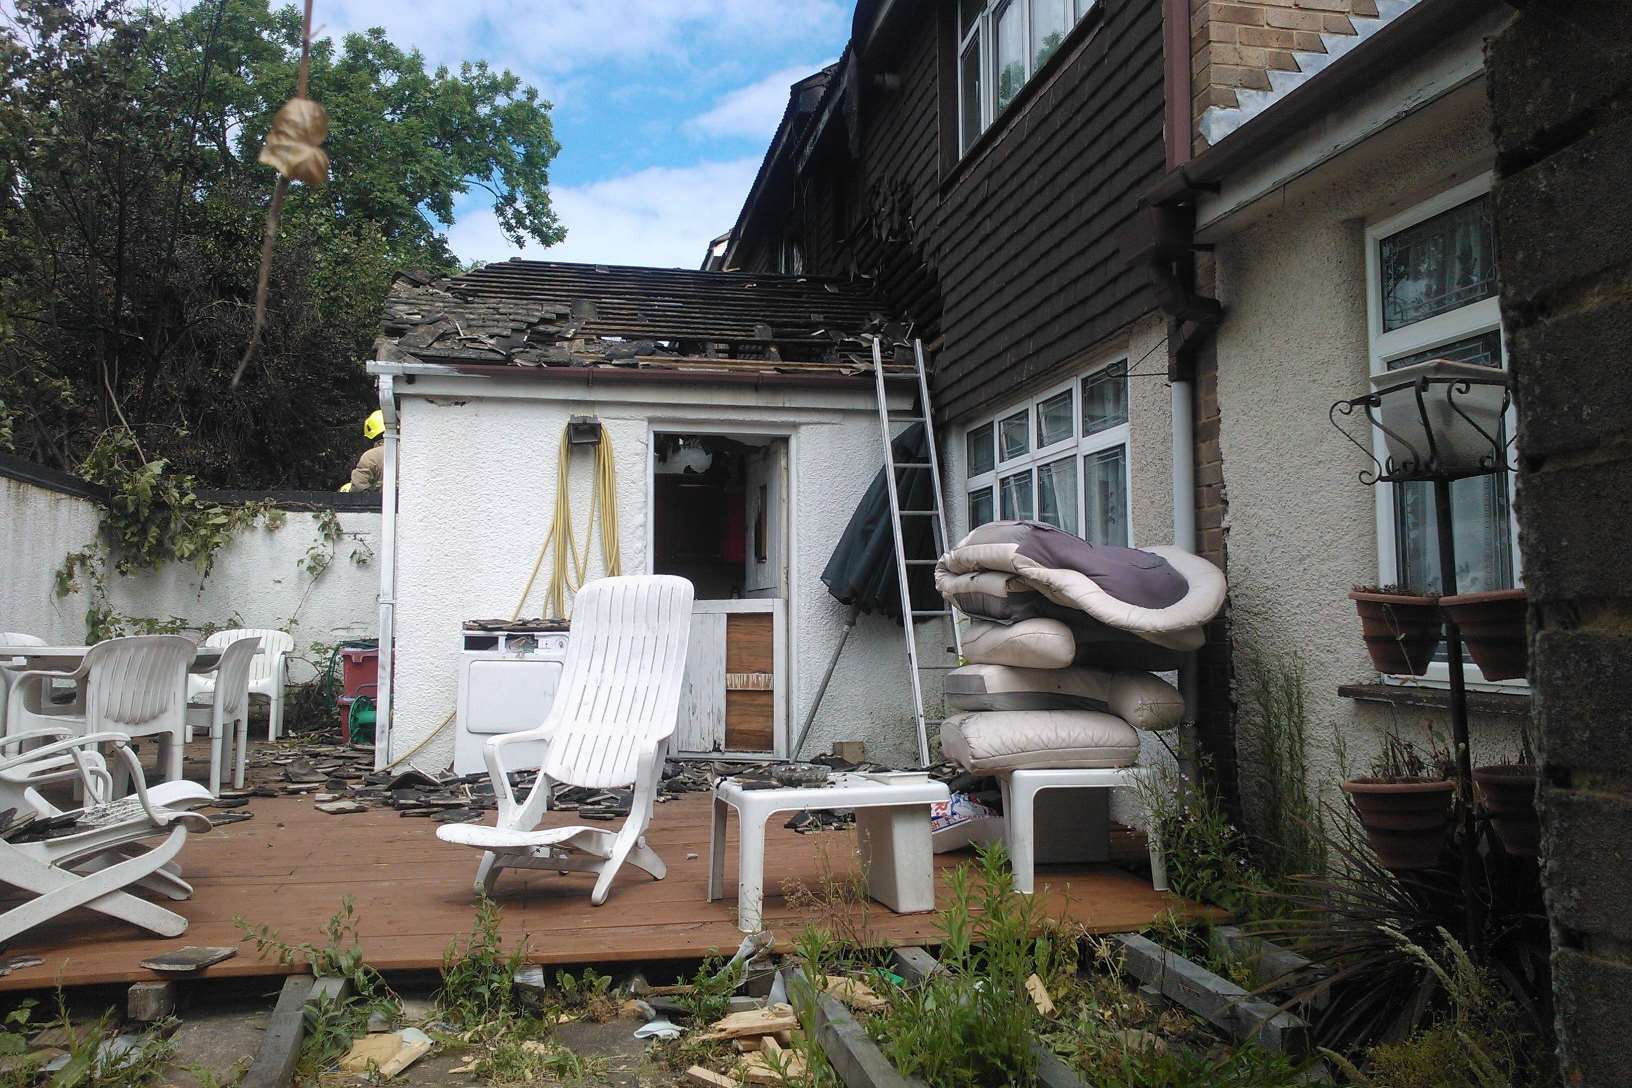 Damage to the roof of one of the homes